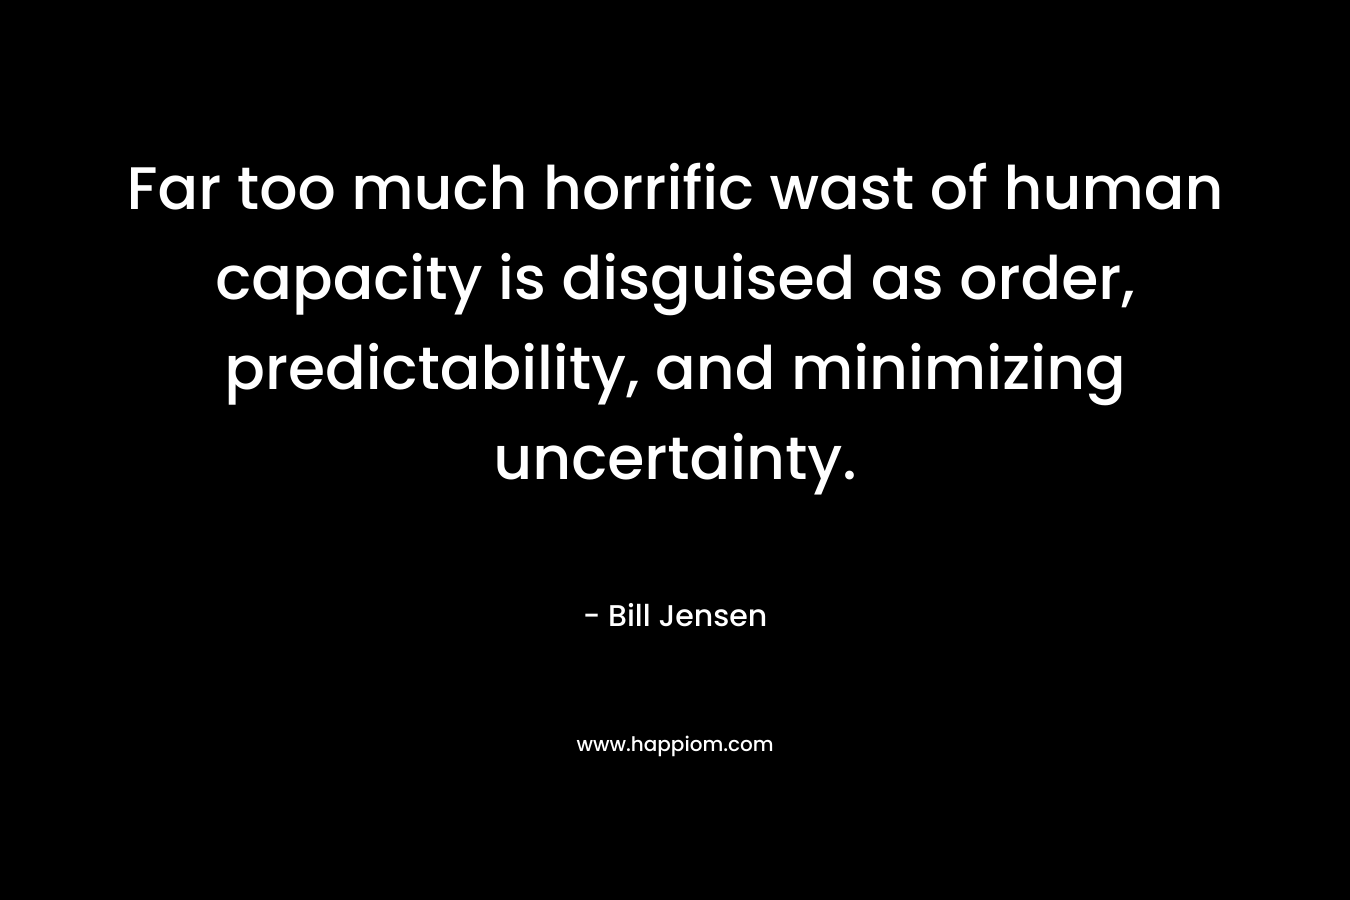 Far too much horrific wast of human capacity is disguised as order, predictability, and minimizing uncertainty. – Bill Jensen